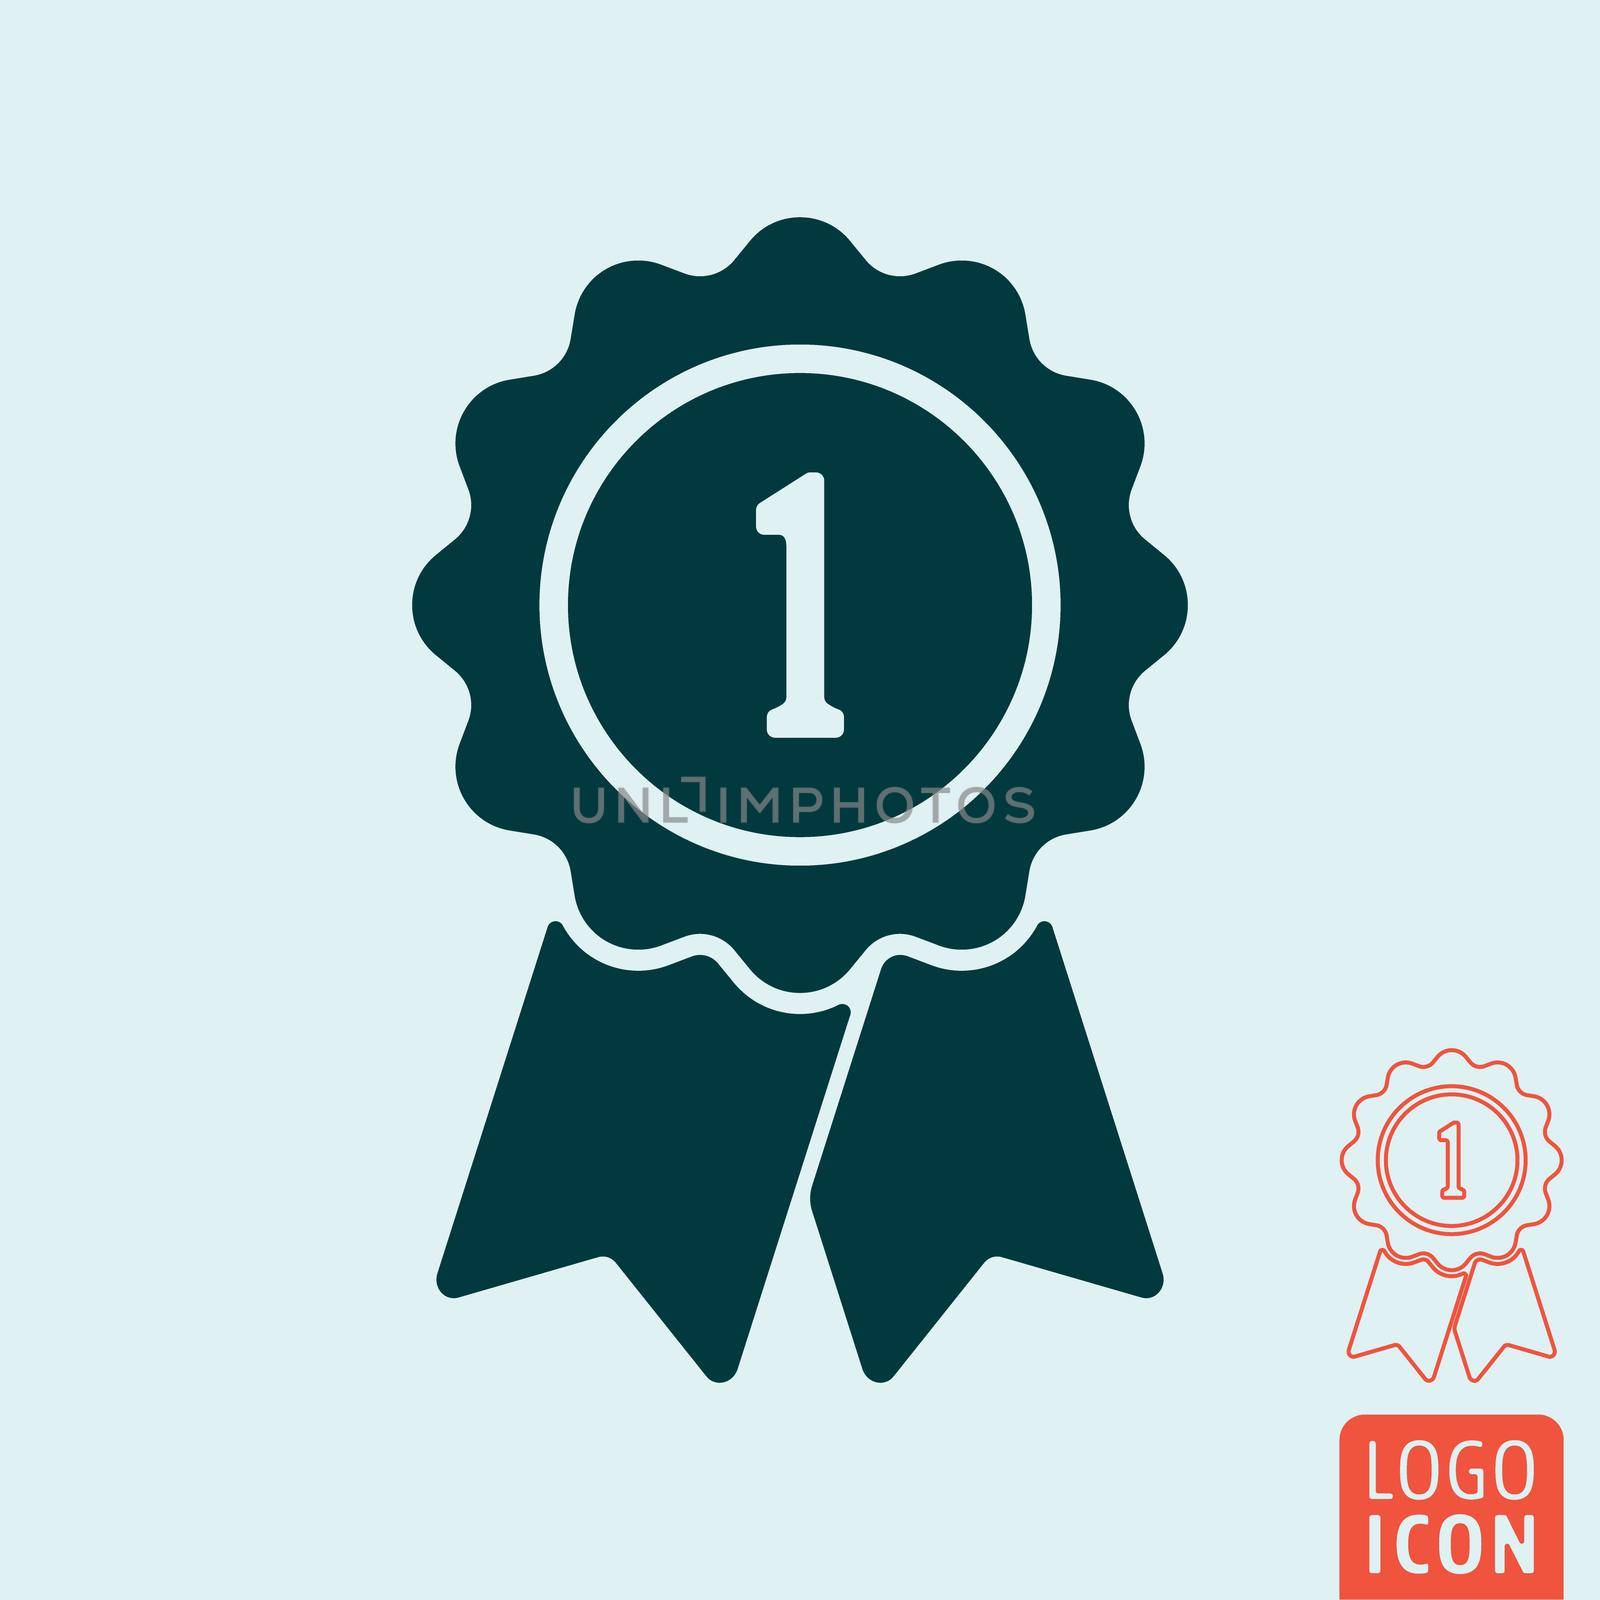 Award icon. Award symbol. First place icon isolated. Badge with ribbons icon. Vector illustration